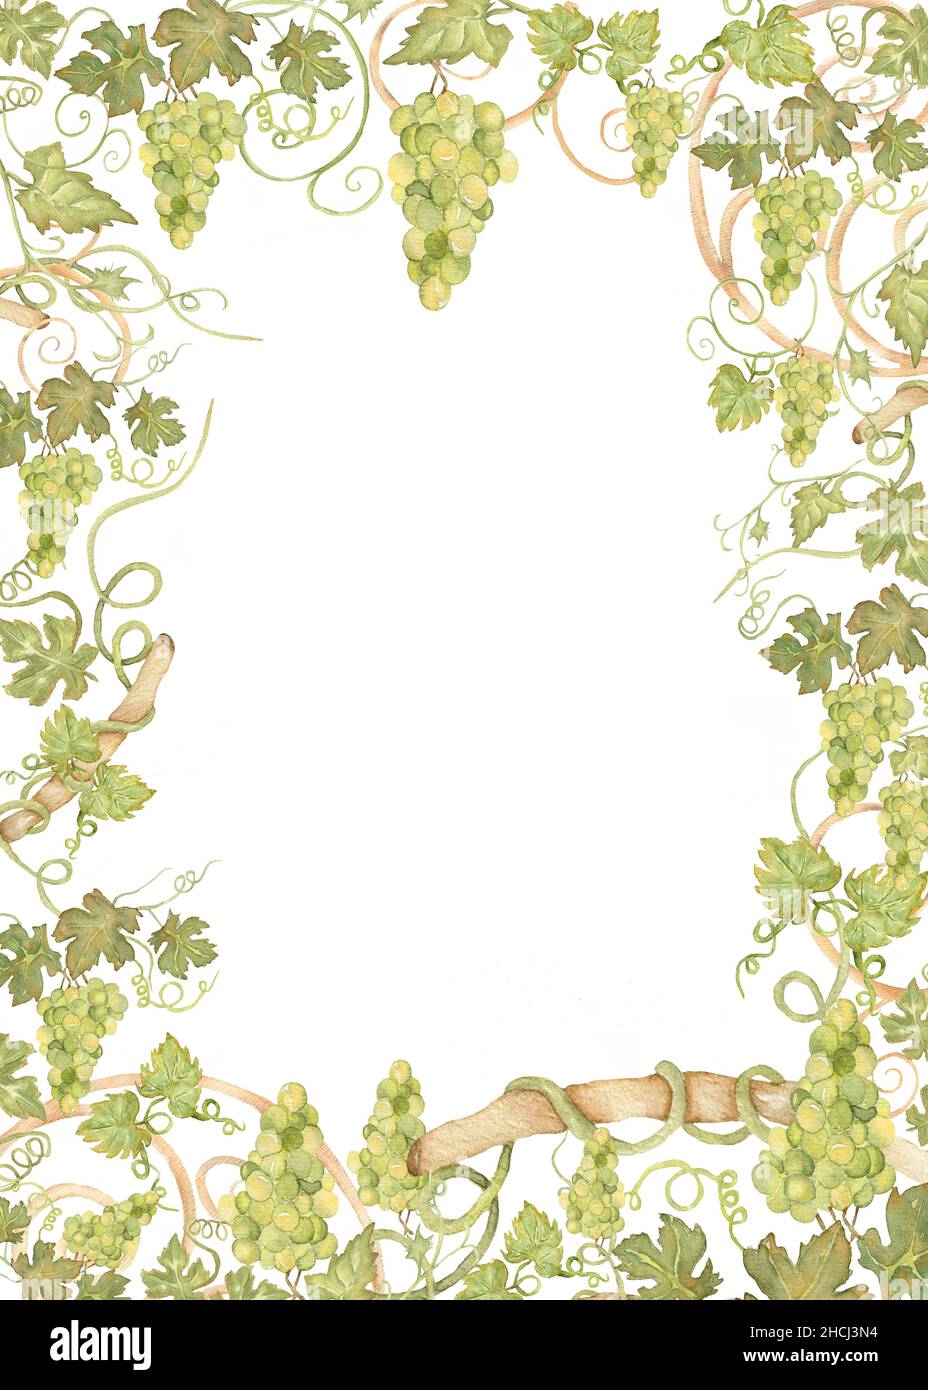 Beautiful Grapes Frame Clipart, Watercolor Wine Label border, Leaves clip art, Vineyard, Green Fruits, Vinery, wedding invitation, card making, tags d Stock Photo